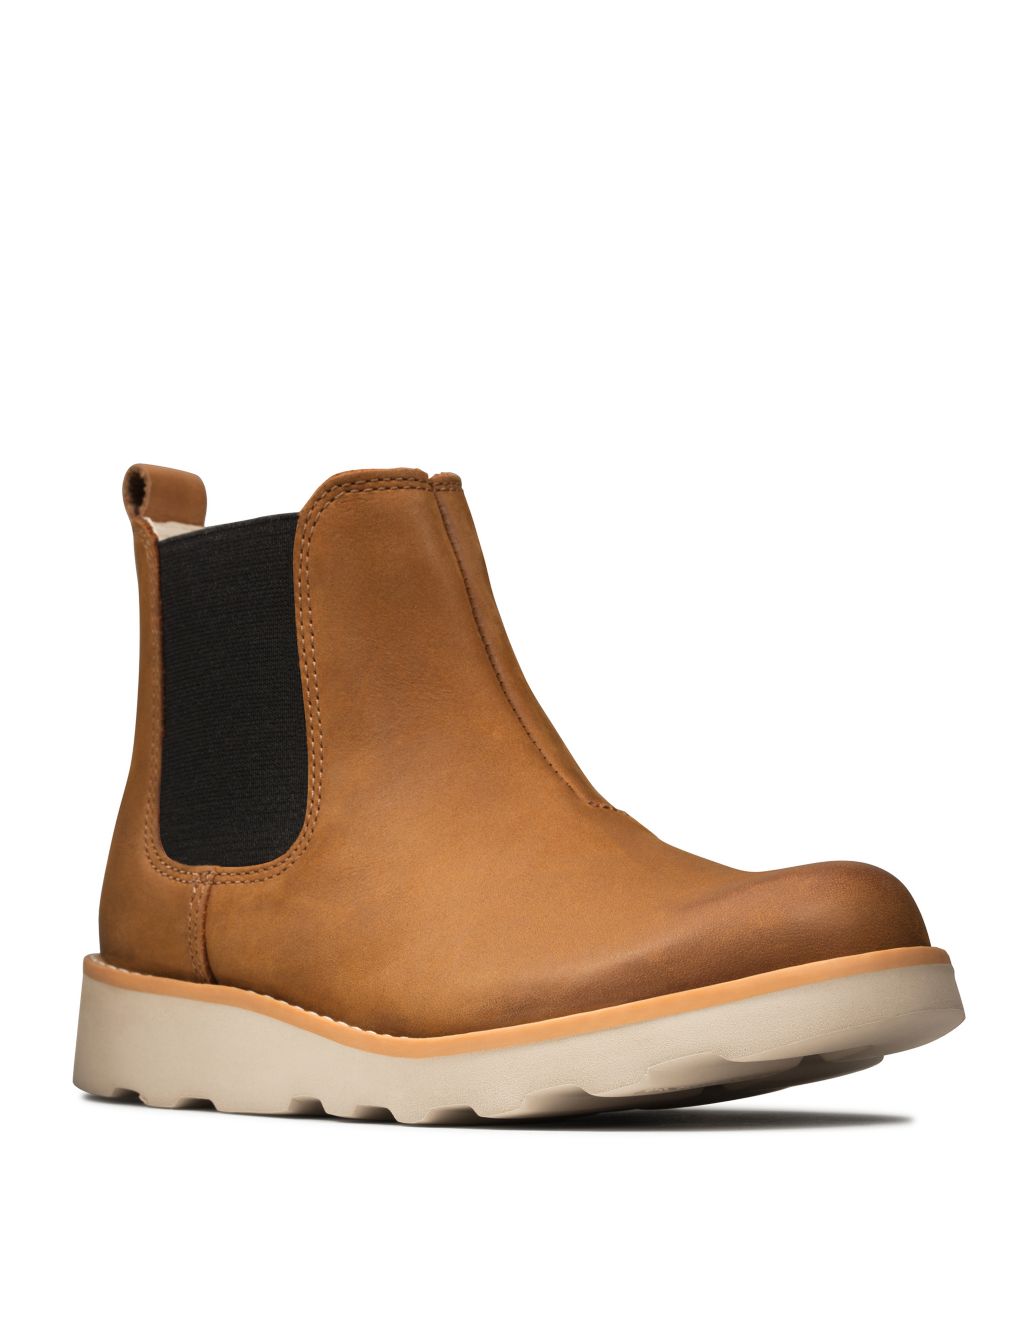 Kids' Leather Chelsea Boots image 1